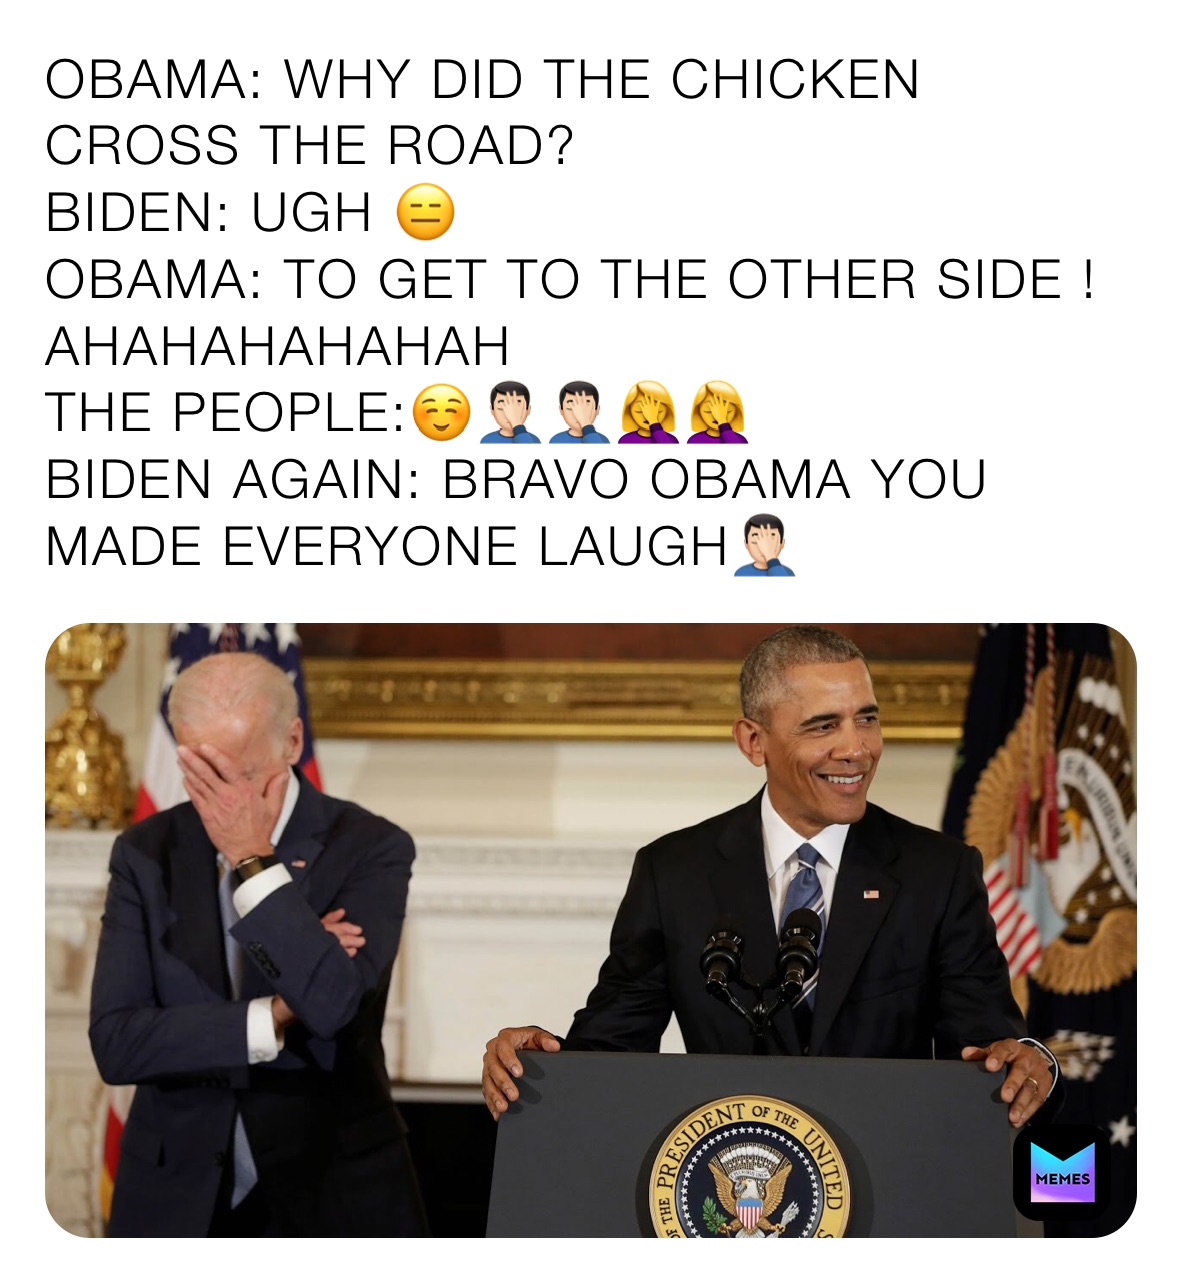 OBAMA: WHY DID THE CHICKEN CROSS THE ROAD?
BIDEN: UGH 😑
OBAMA: TO GET TO THE OTHER SIDE ! AHAHAHAHAHAH 
THE PEOPLE:☺️🤦🏻‍♂️🤦🏻‍♂️🤦‍♀️🤦‍♀️ 
BIDEN AGAIN: BRAVO OBAMA YOU MADE EVERYONE LAUGH🤦🏻‍♂️